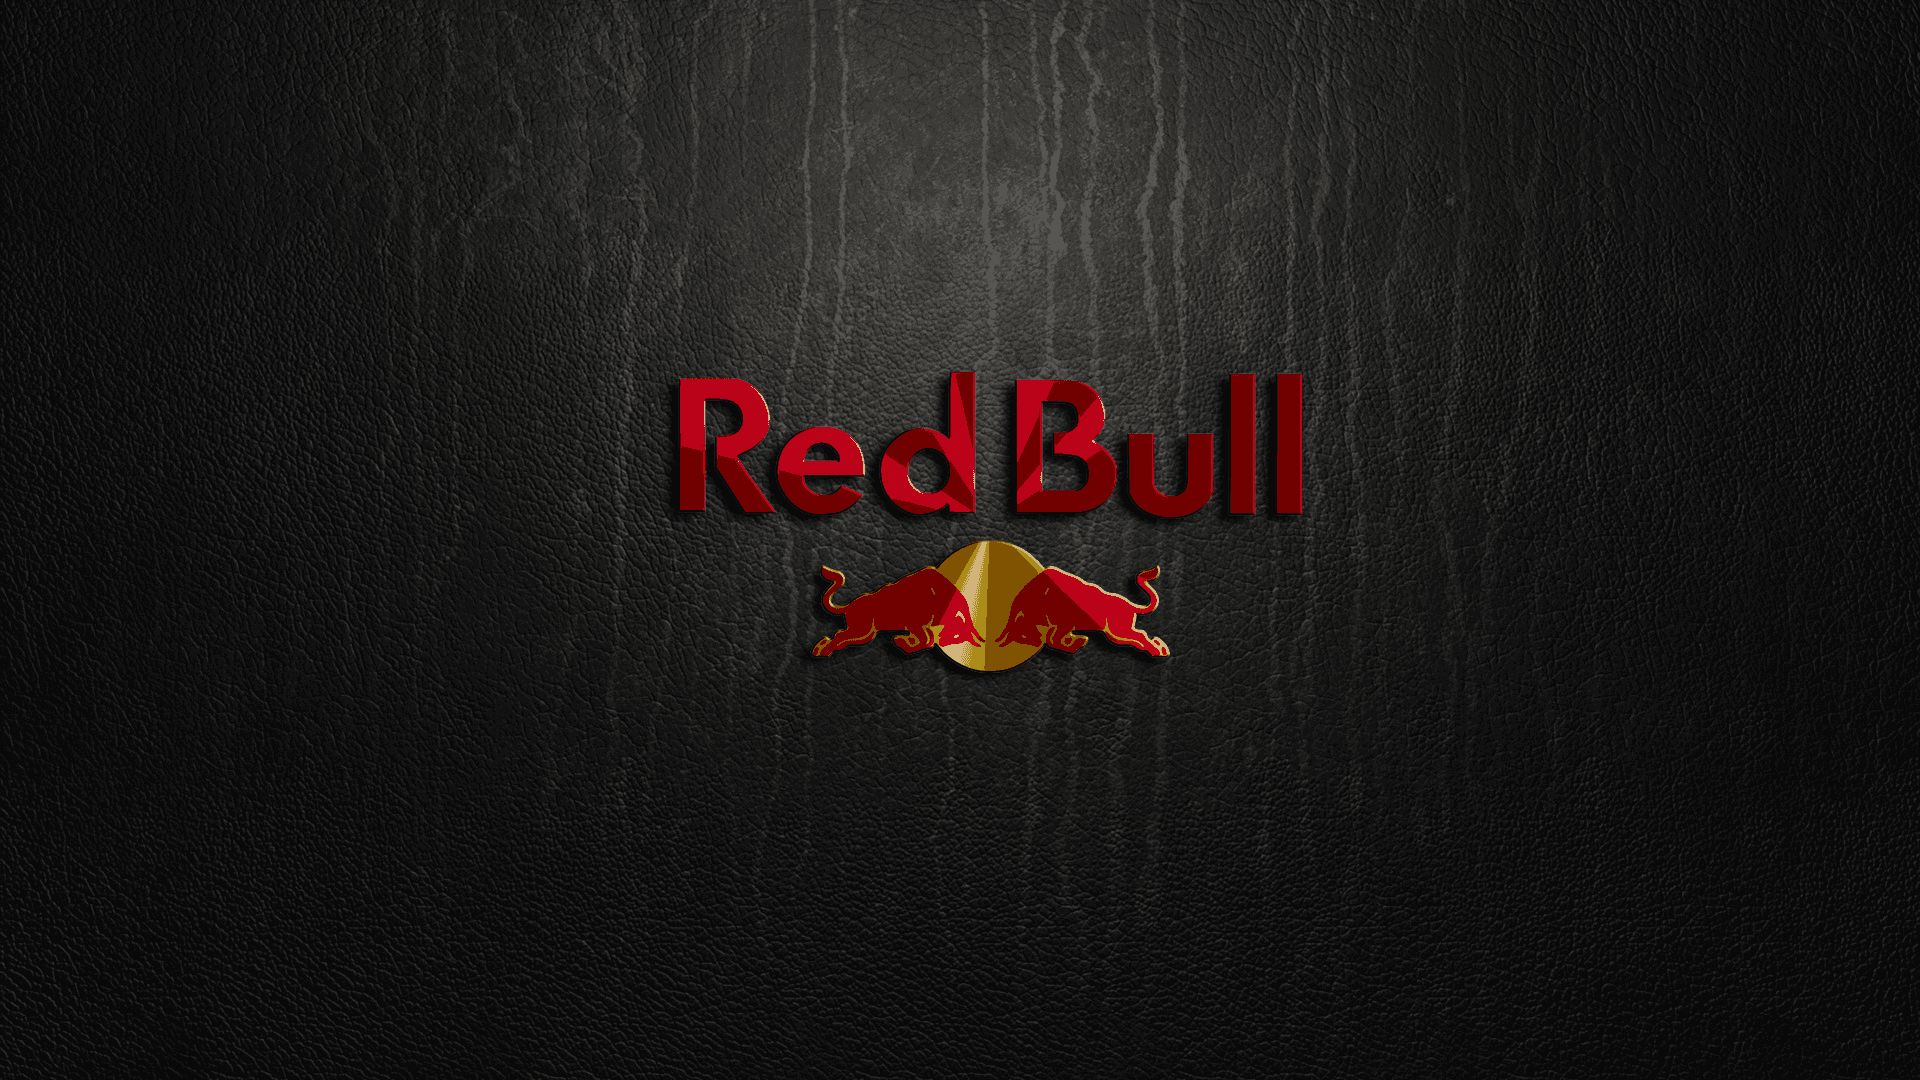 Fuelling Your Dreams with Red Bull